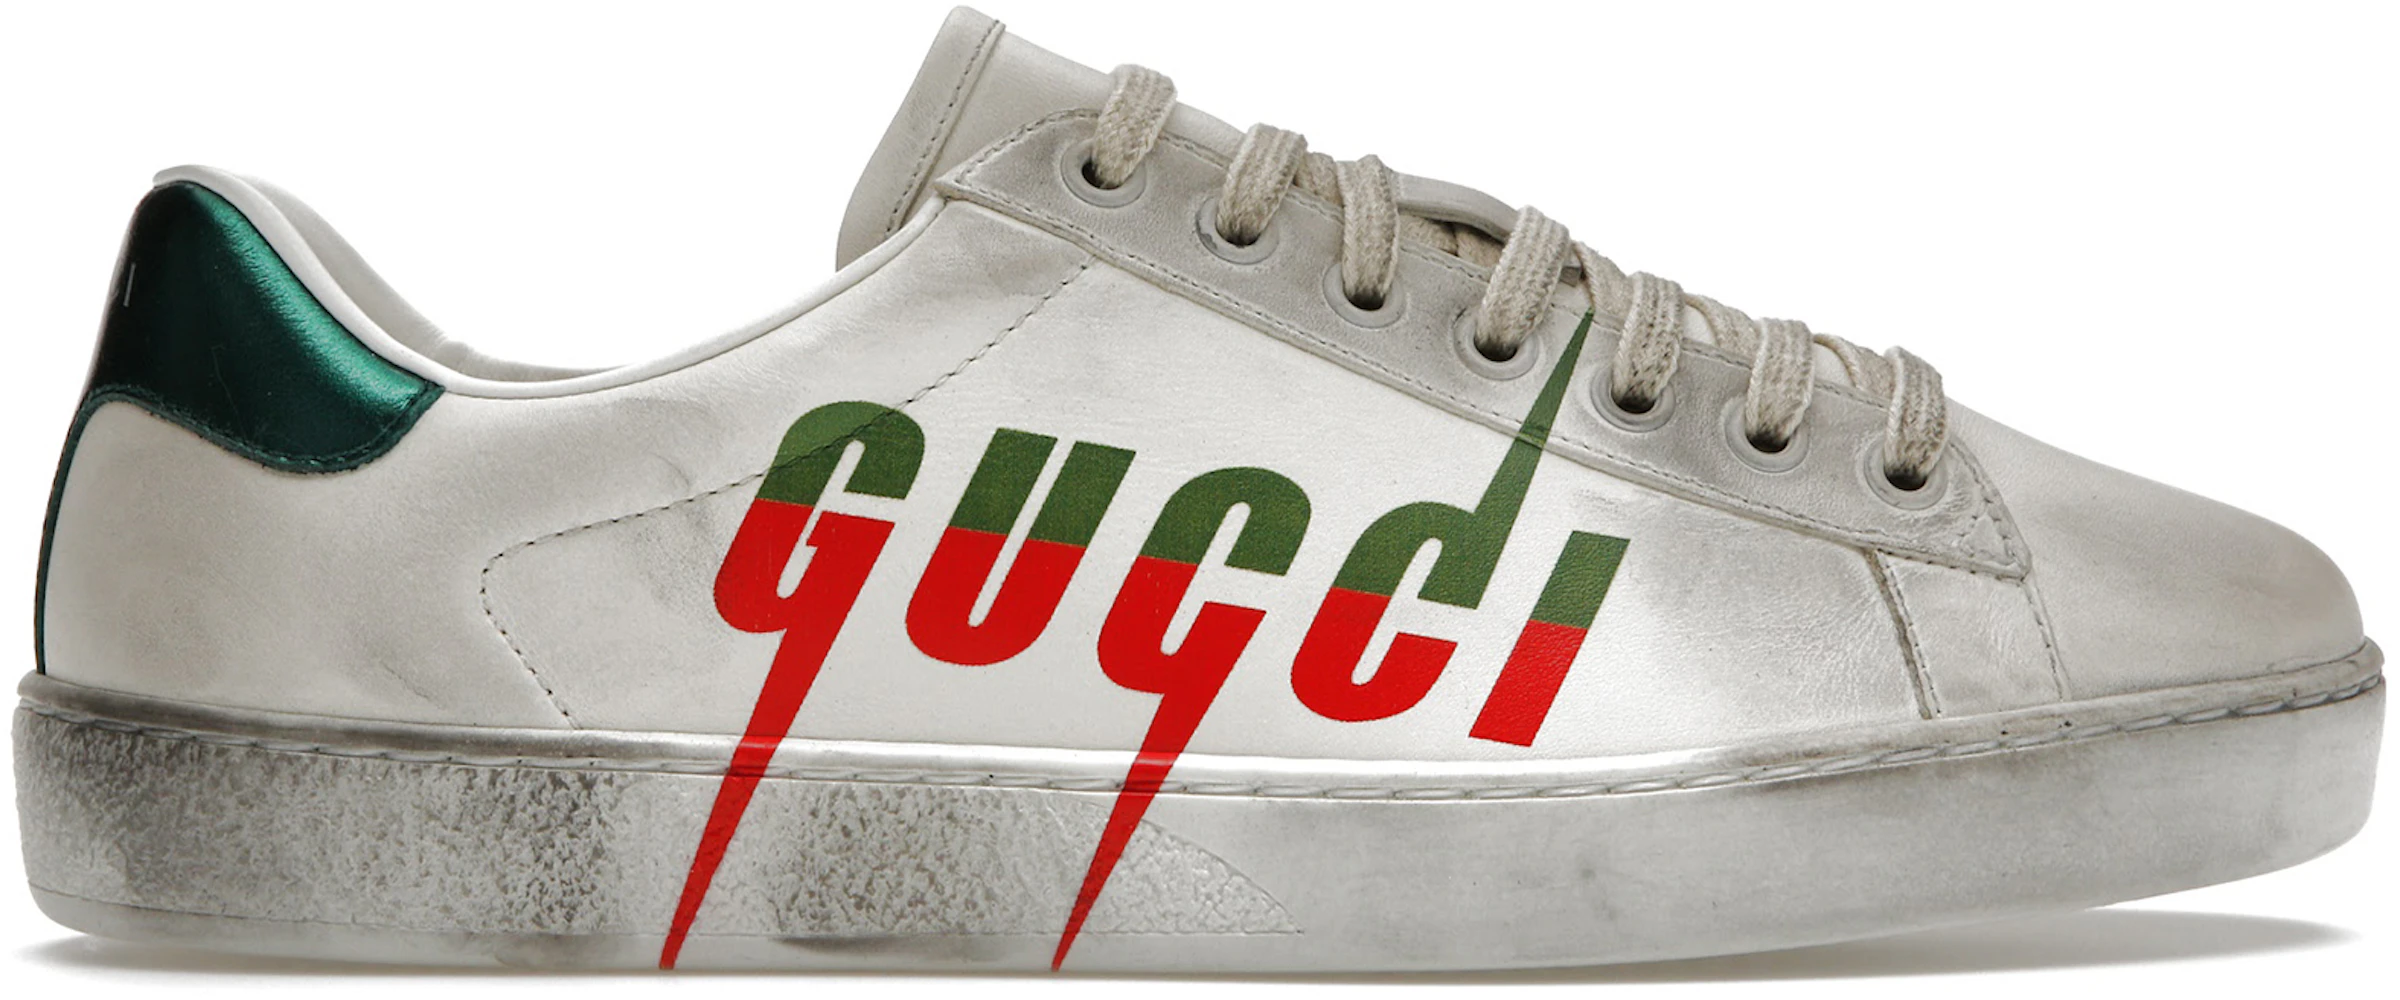 Gucci Ace Blade - 576137 A38V0 9090 - US